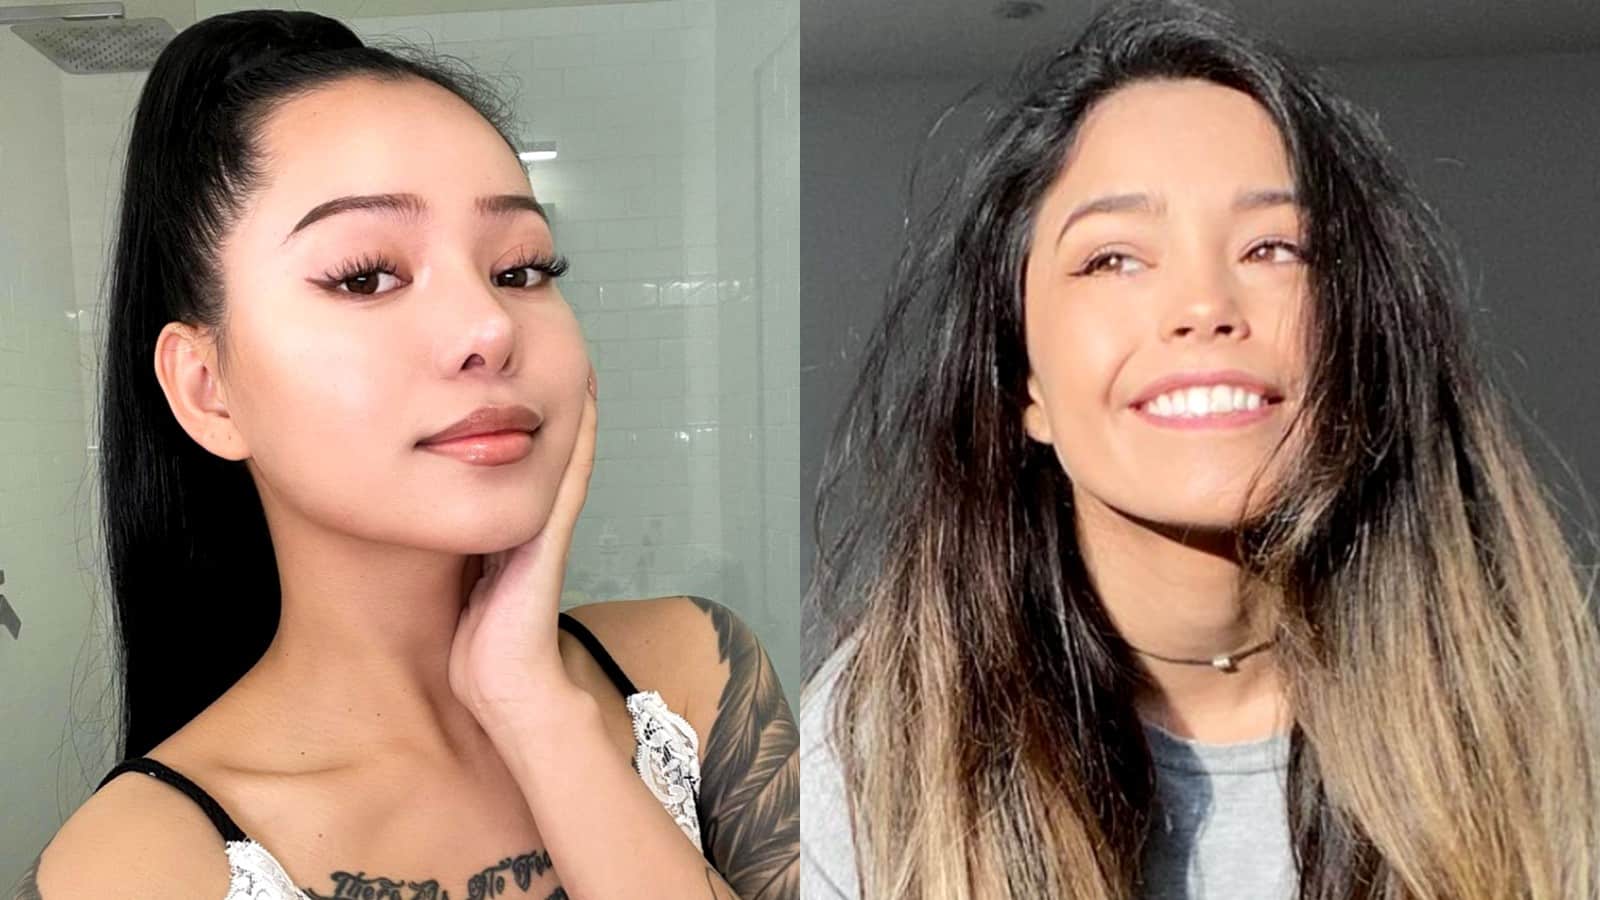 Bella Poarch and Valkyrae in Instagram images